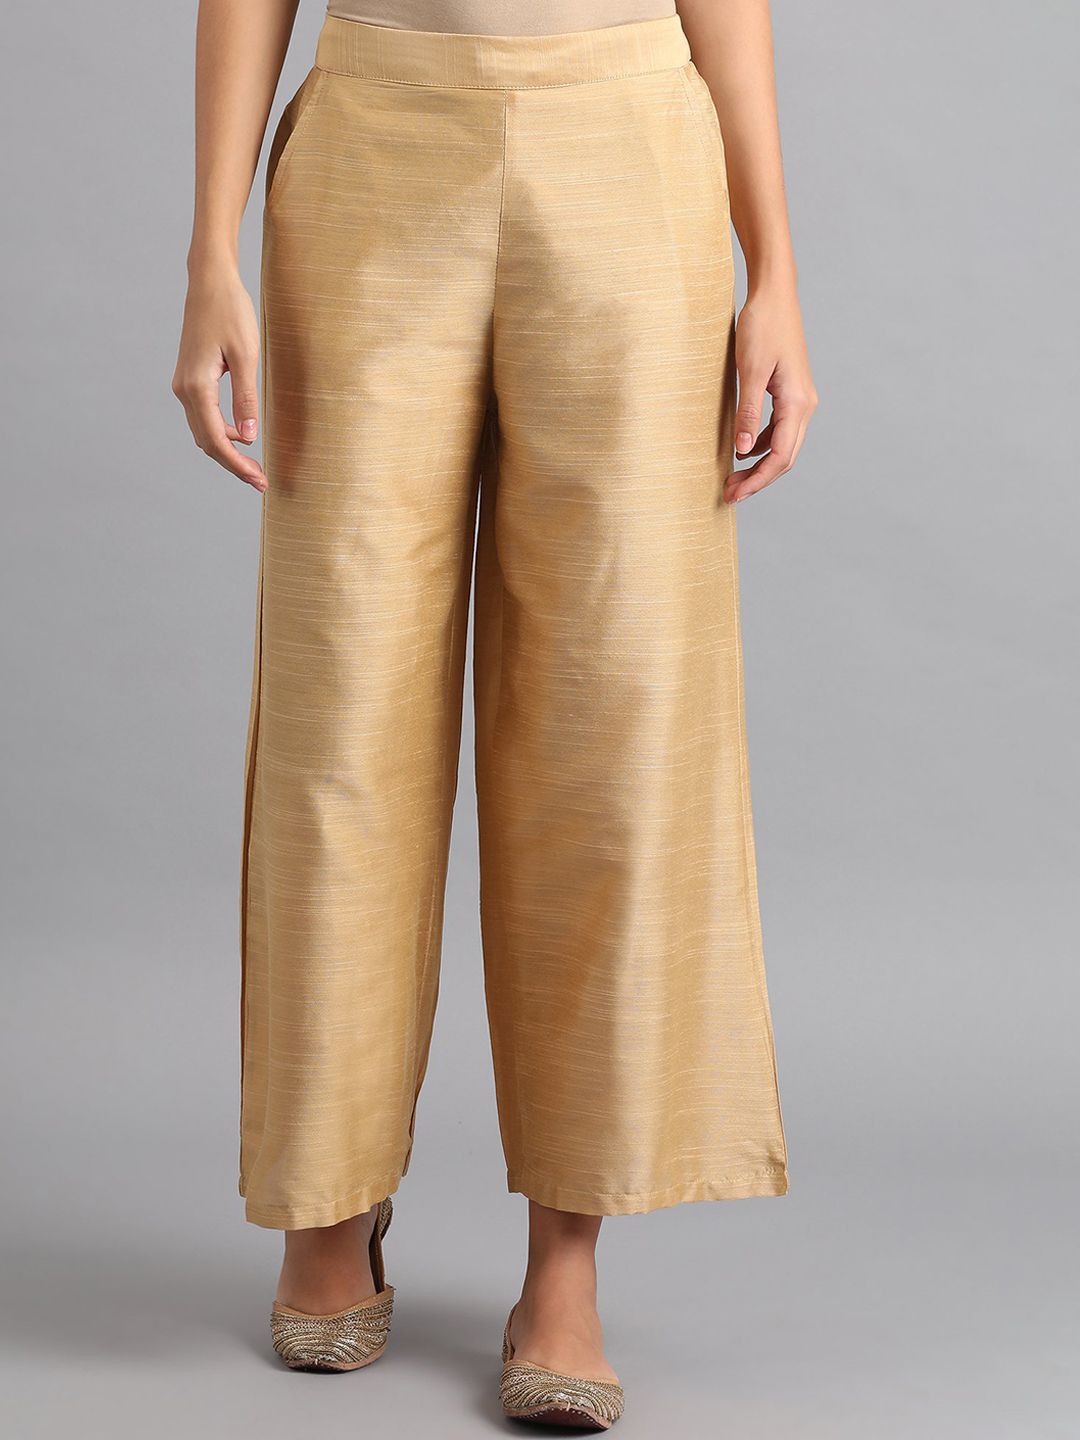 W Women Gold-Toned Trousers Price in India